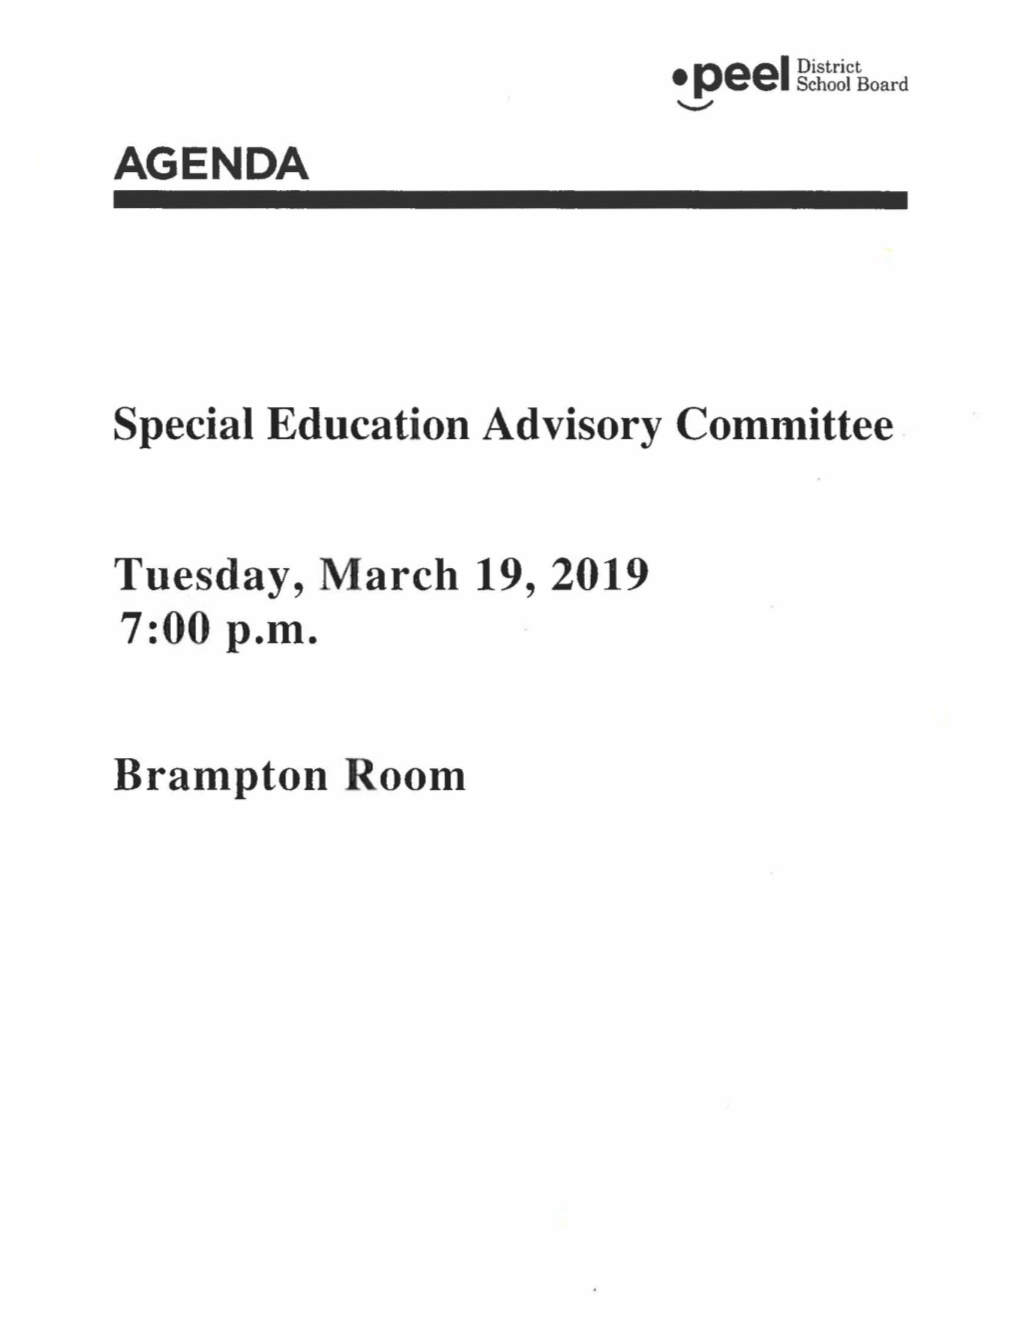 Special Education Advisory Committee Tuesday, March 19